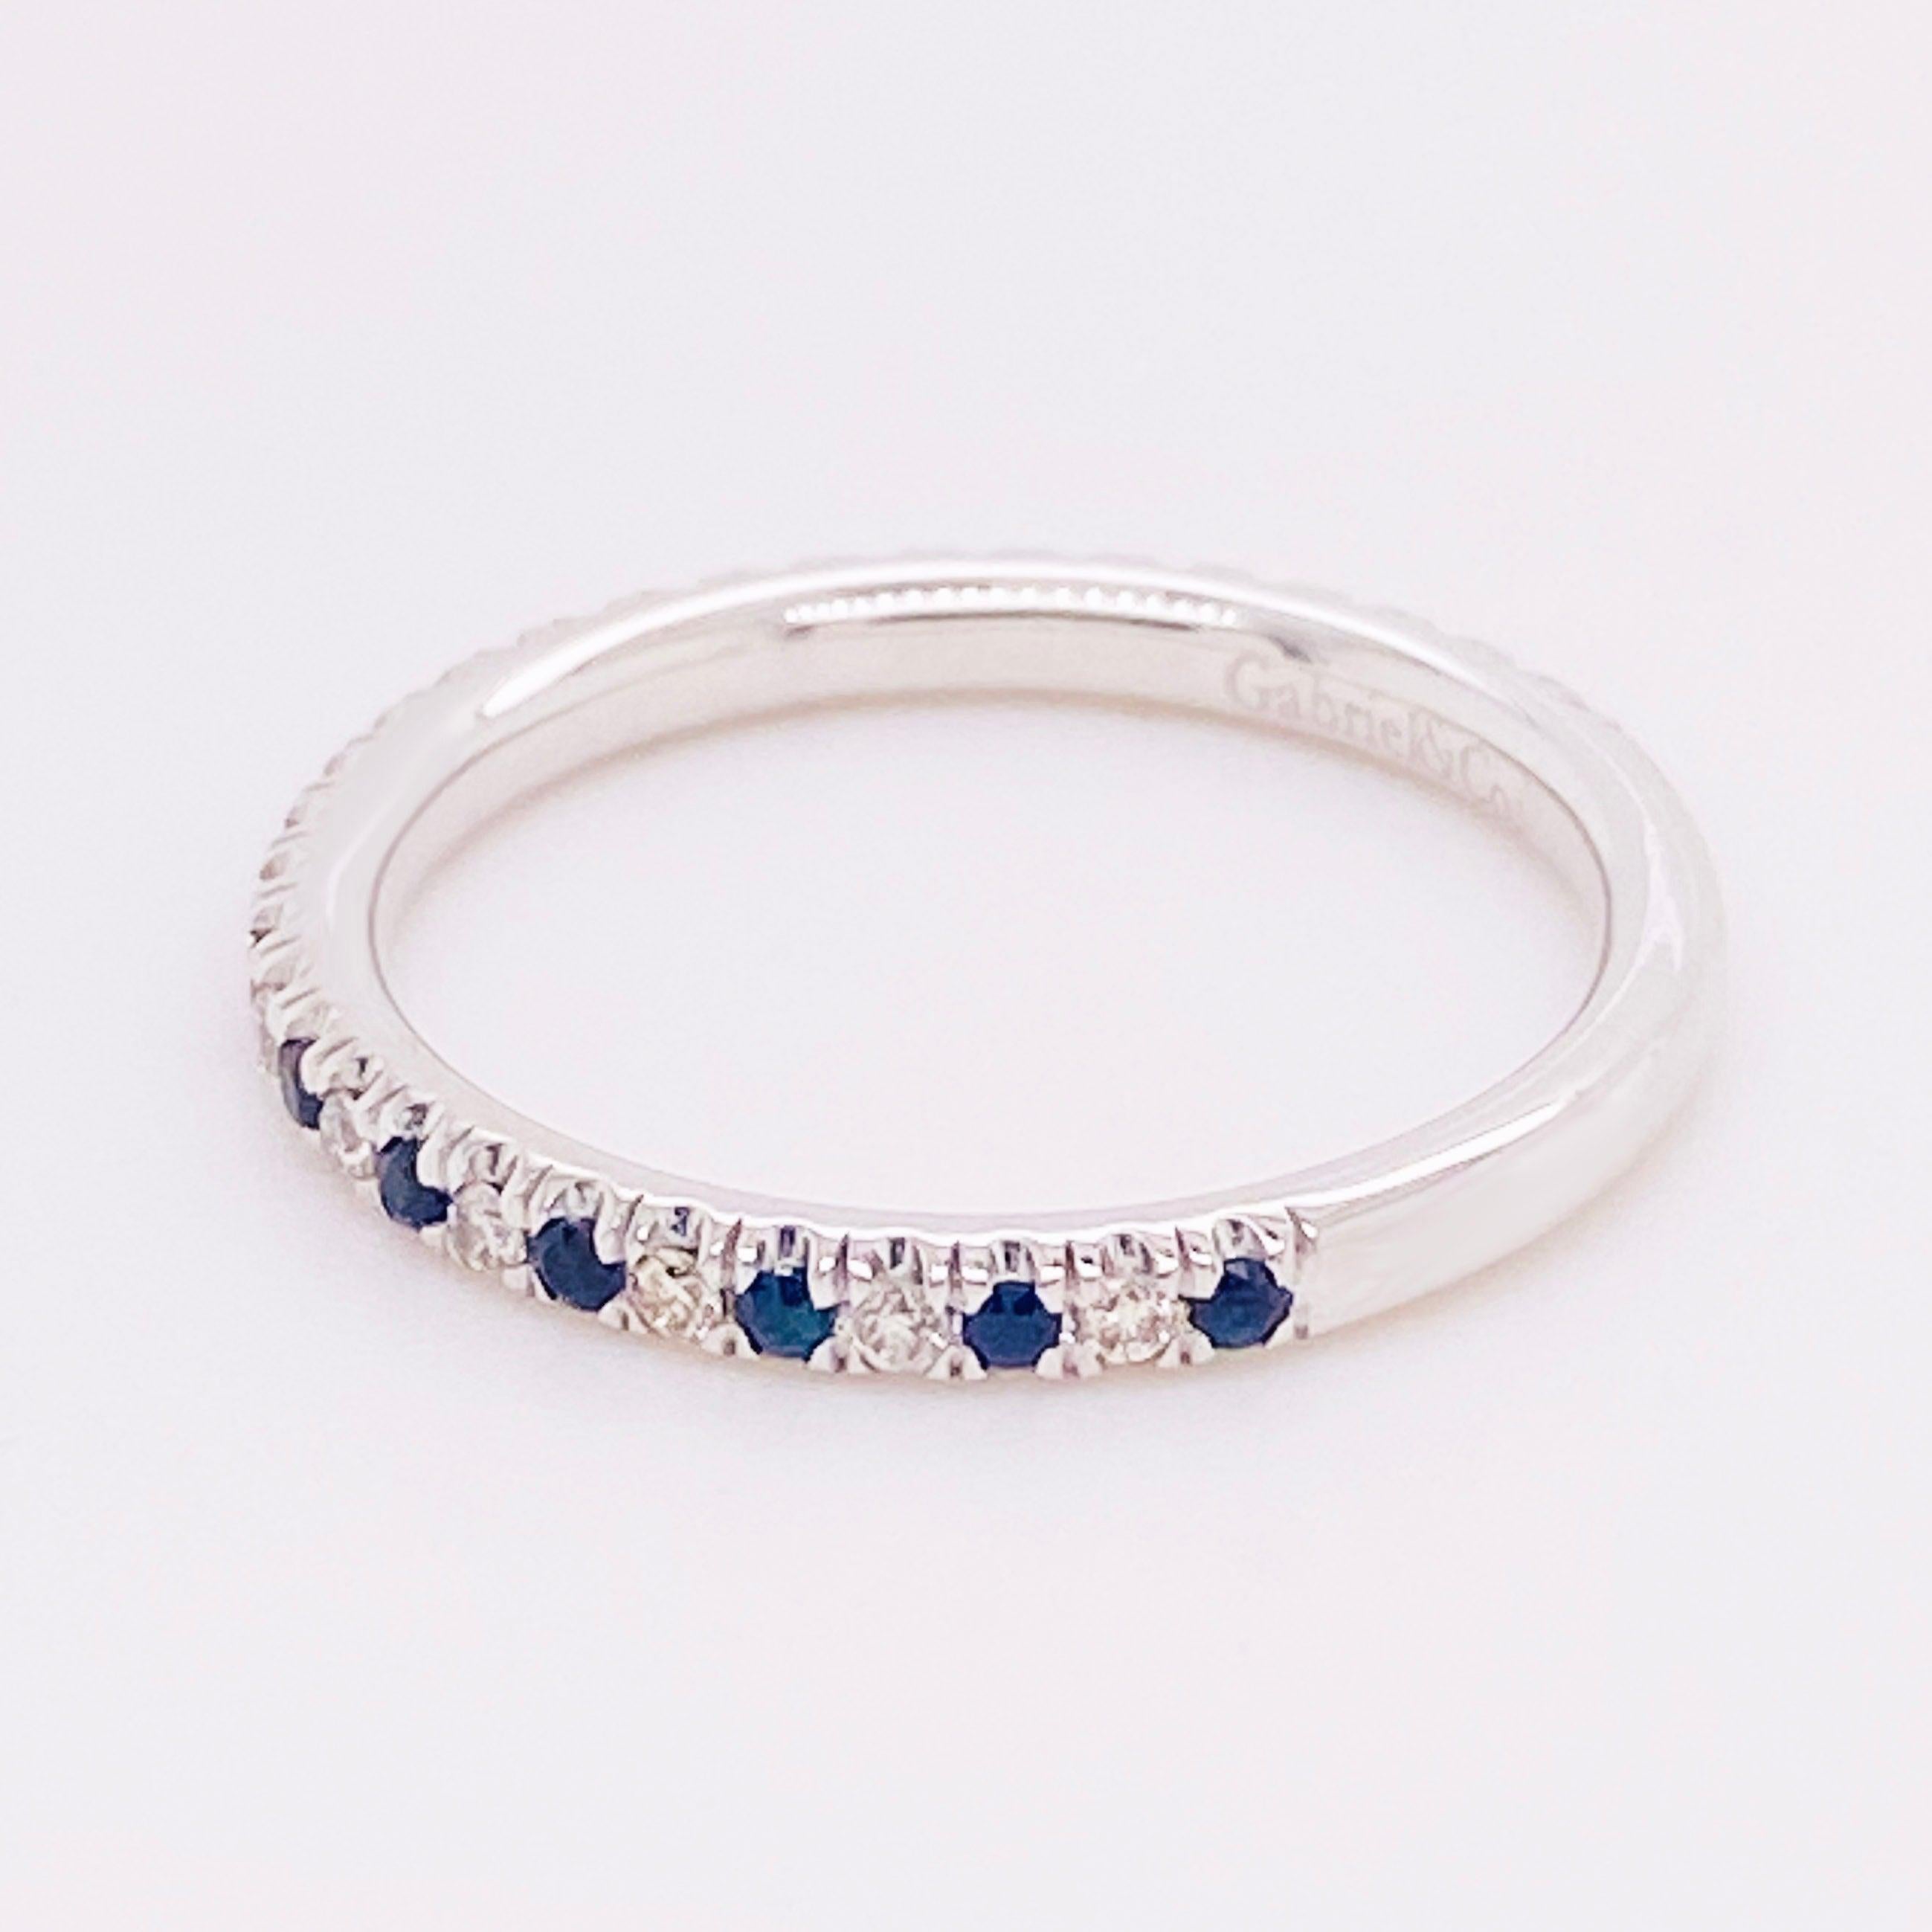 For Sale:  Sapphire Diamond Ring, Blue Sapphire, 14 Kt White Gold, Stackable Band, Classic 4